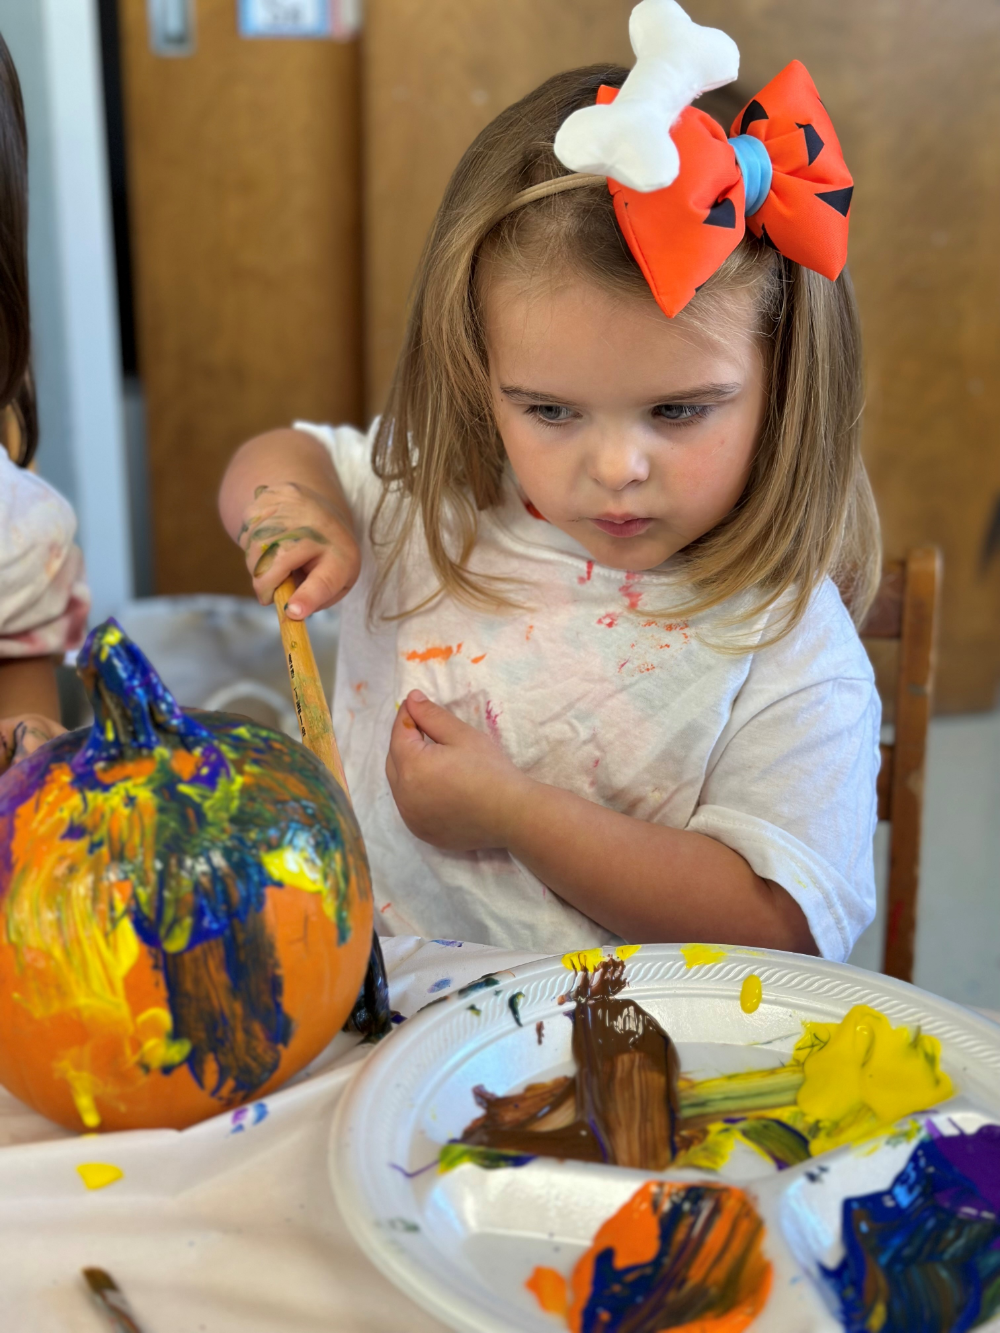 A child painting a small pumpkin.